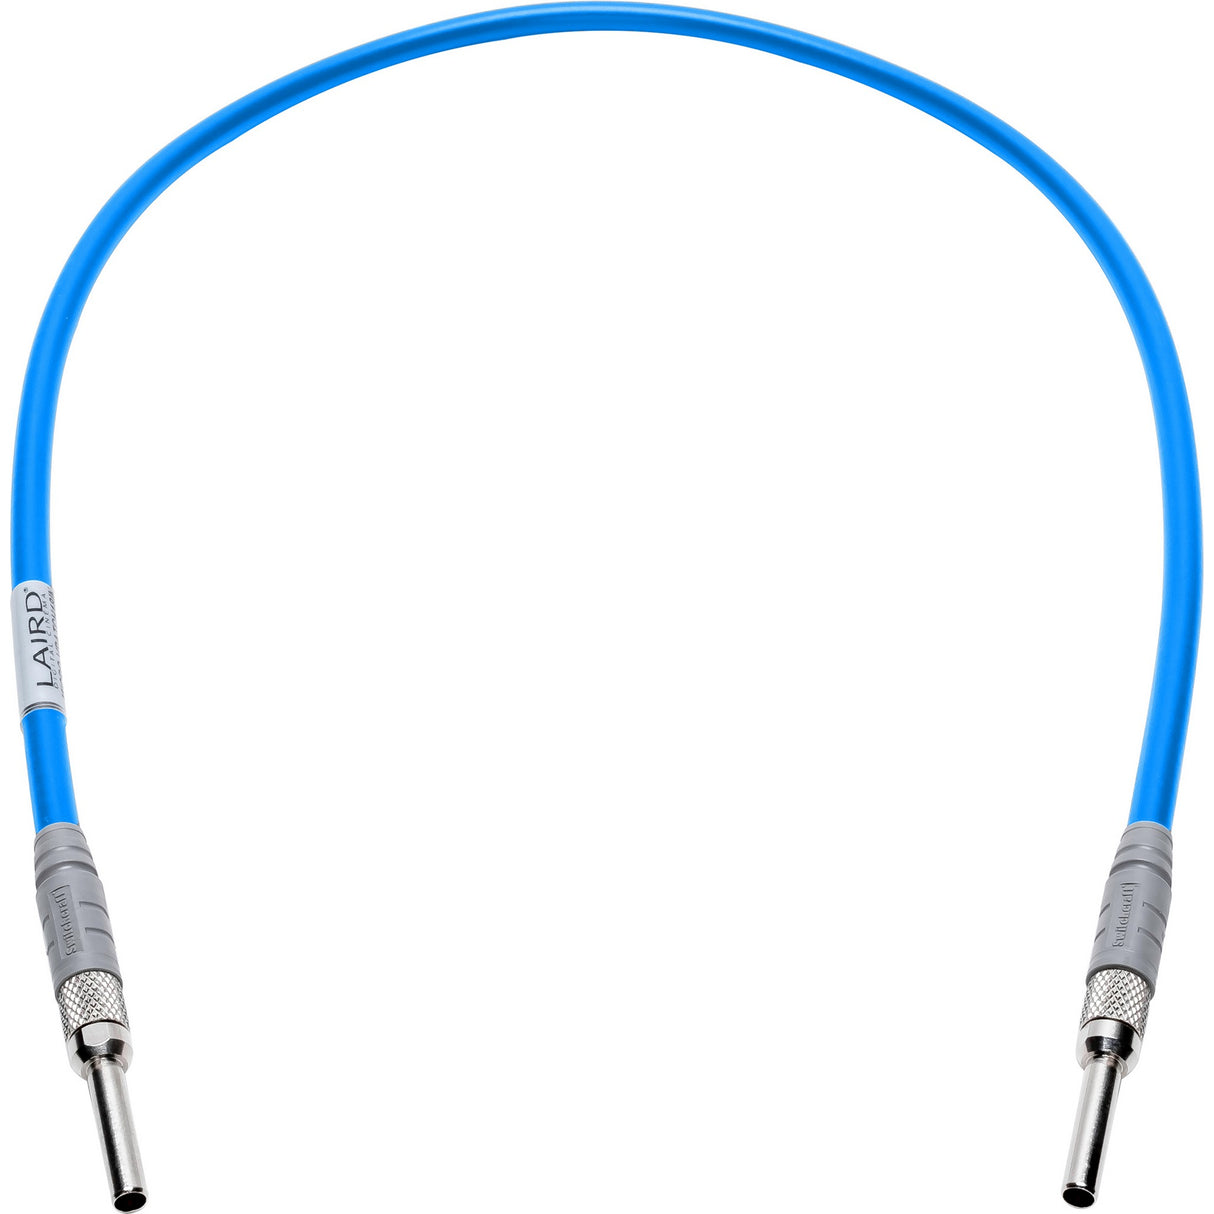 Laird MICRO-VPATCH-001BE 12G-SDI Micro Video Patch Cable, Light Blue, 1-Foot